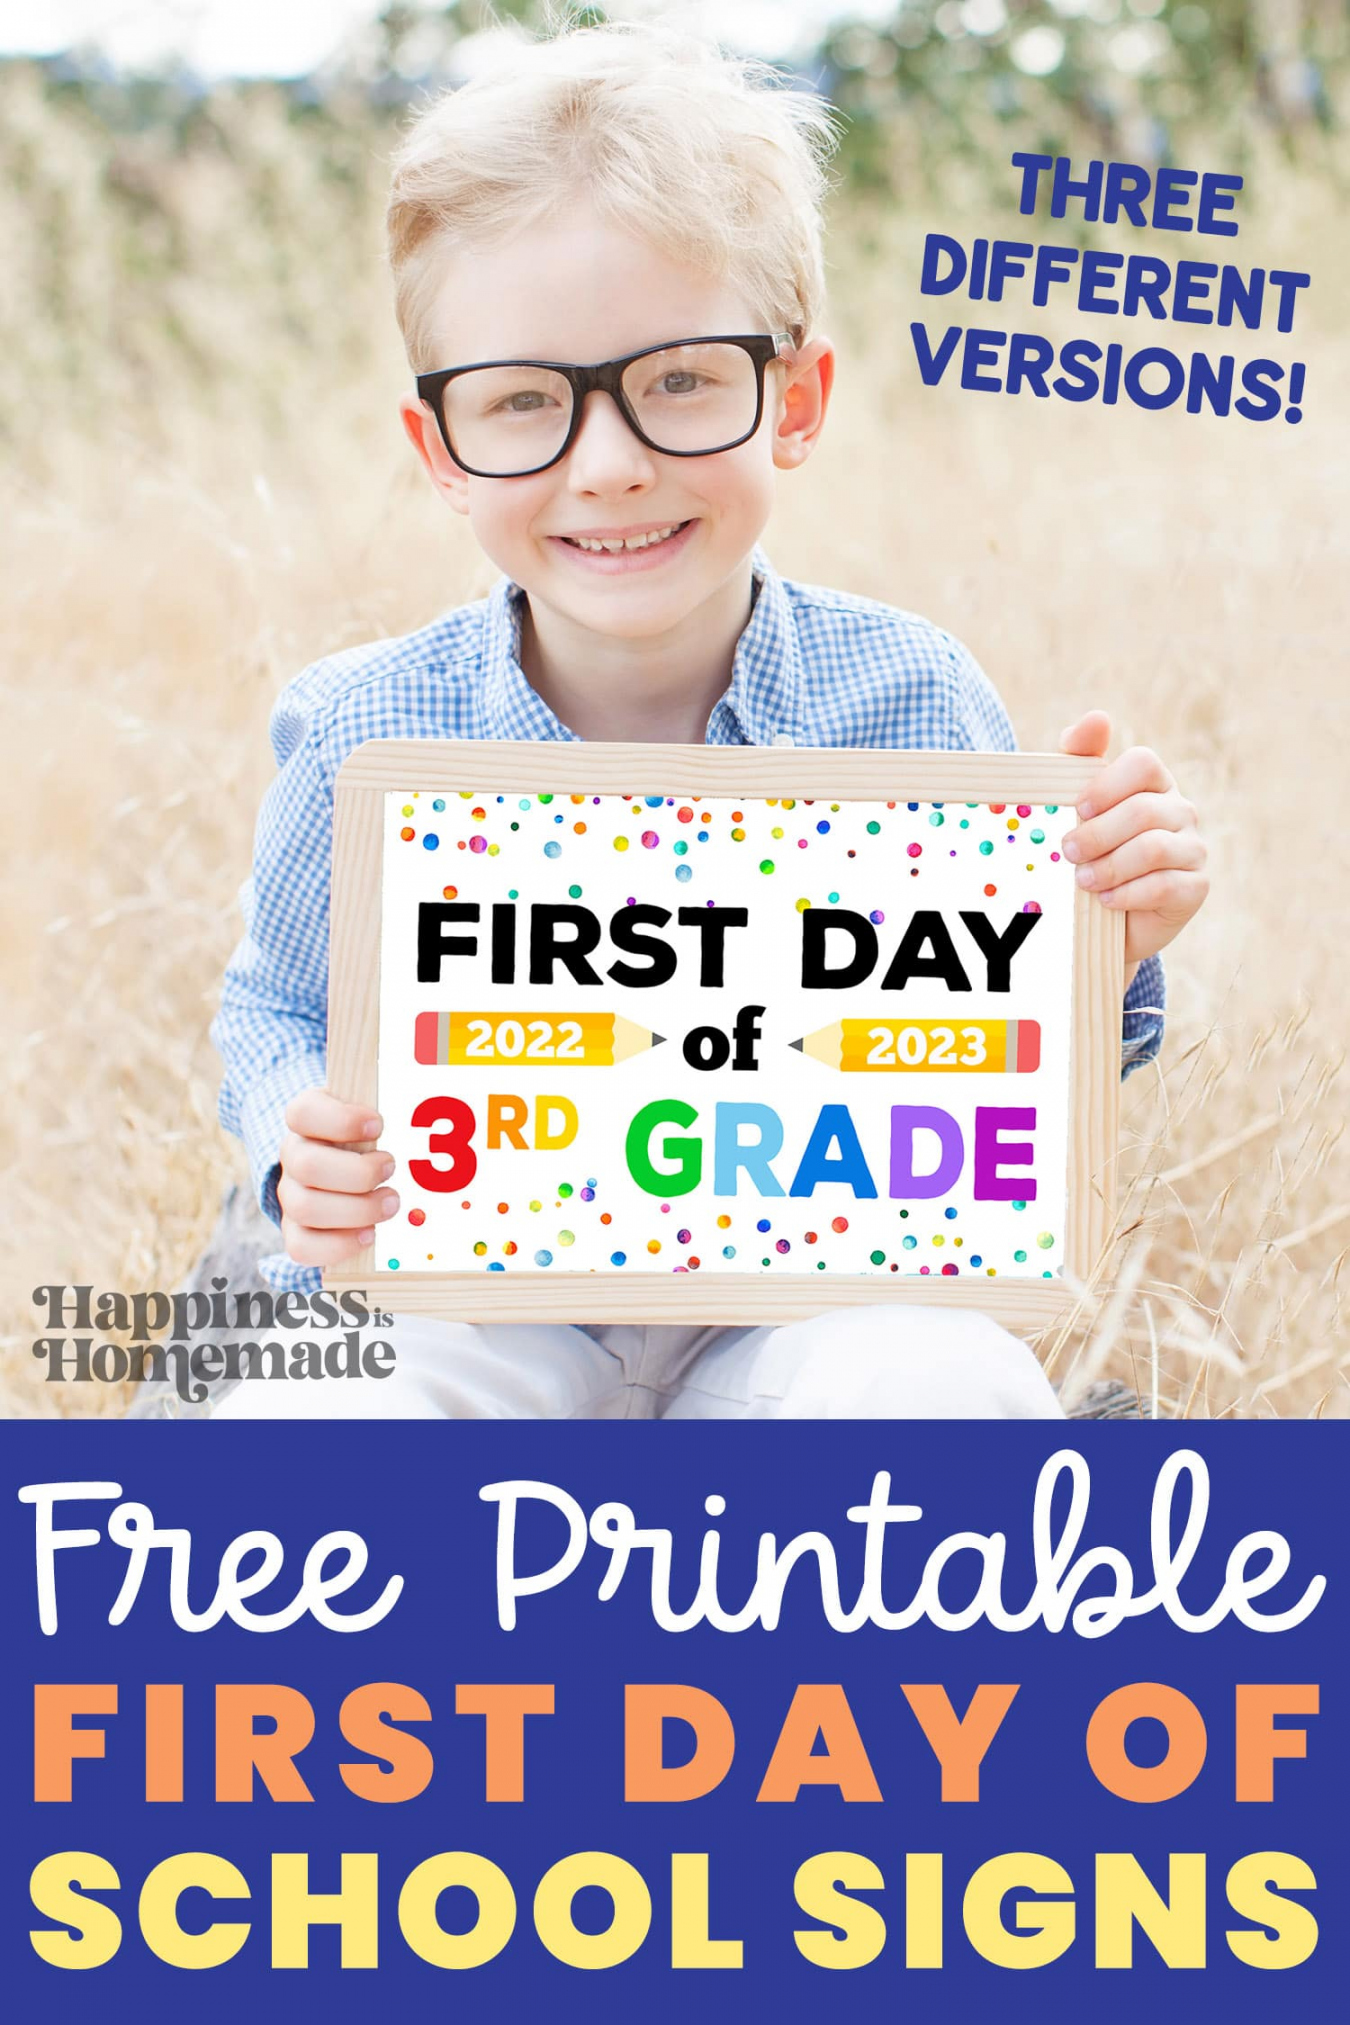 Free Printable First Day of School Sign - Printable - Free Printable First Day of School Signs - - Happiness is